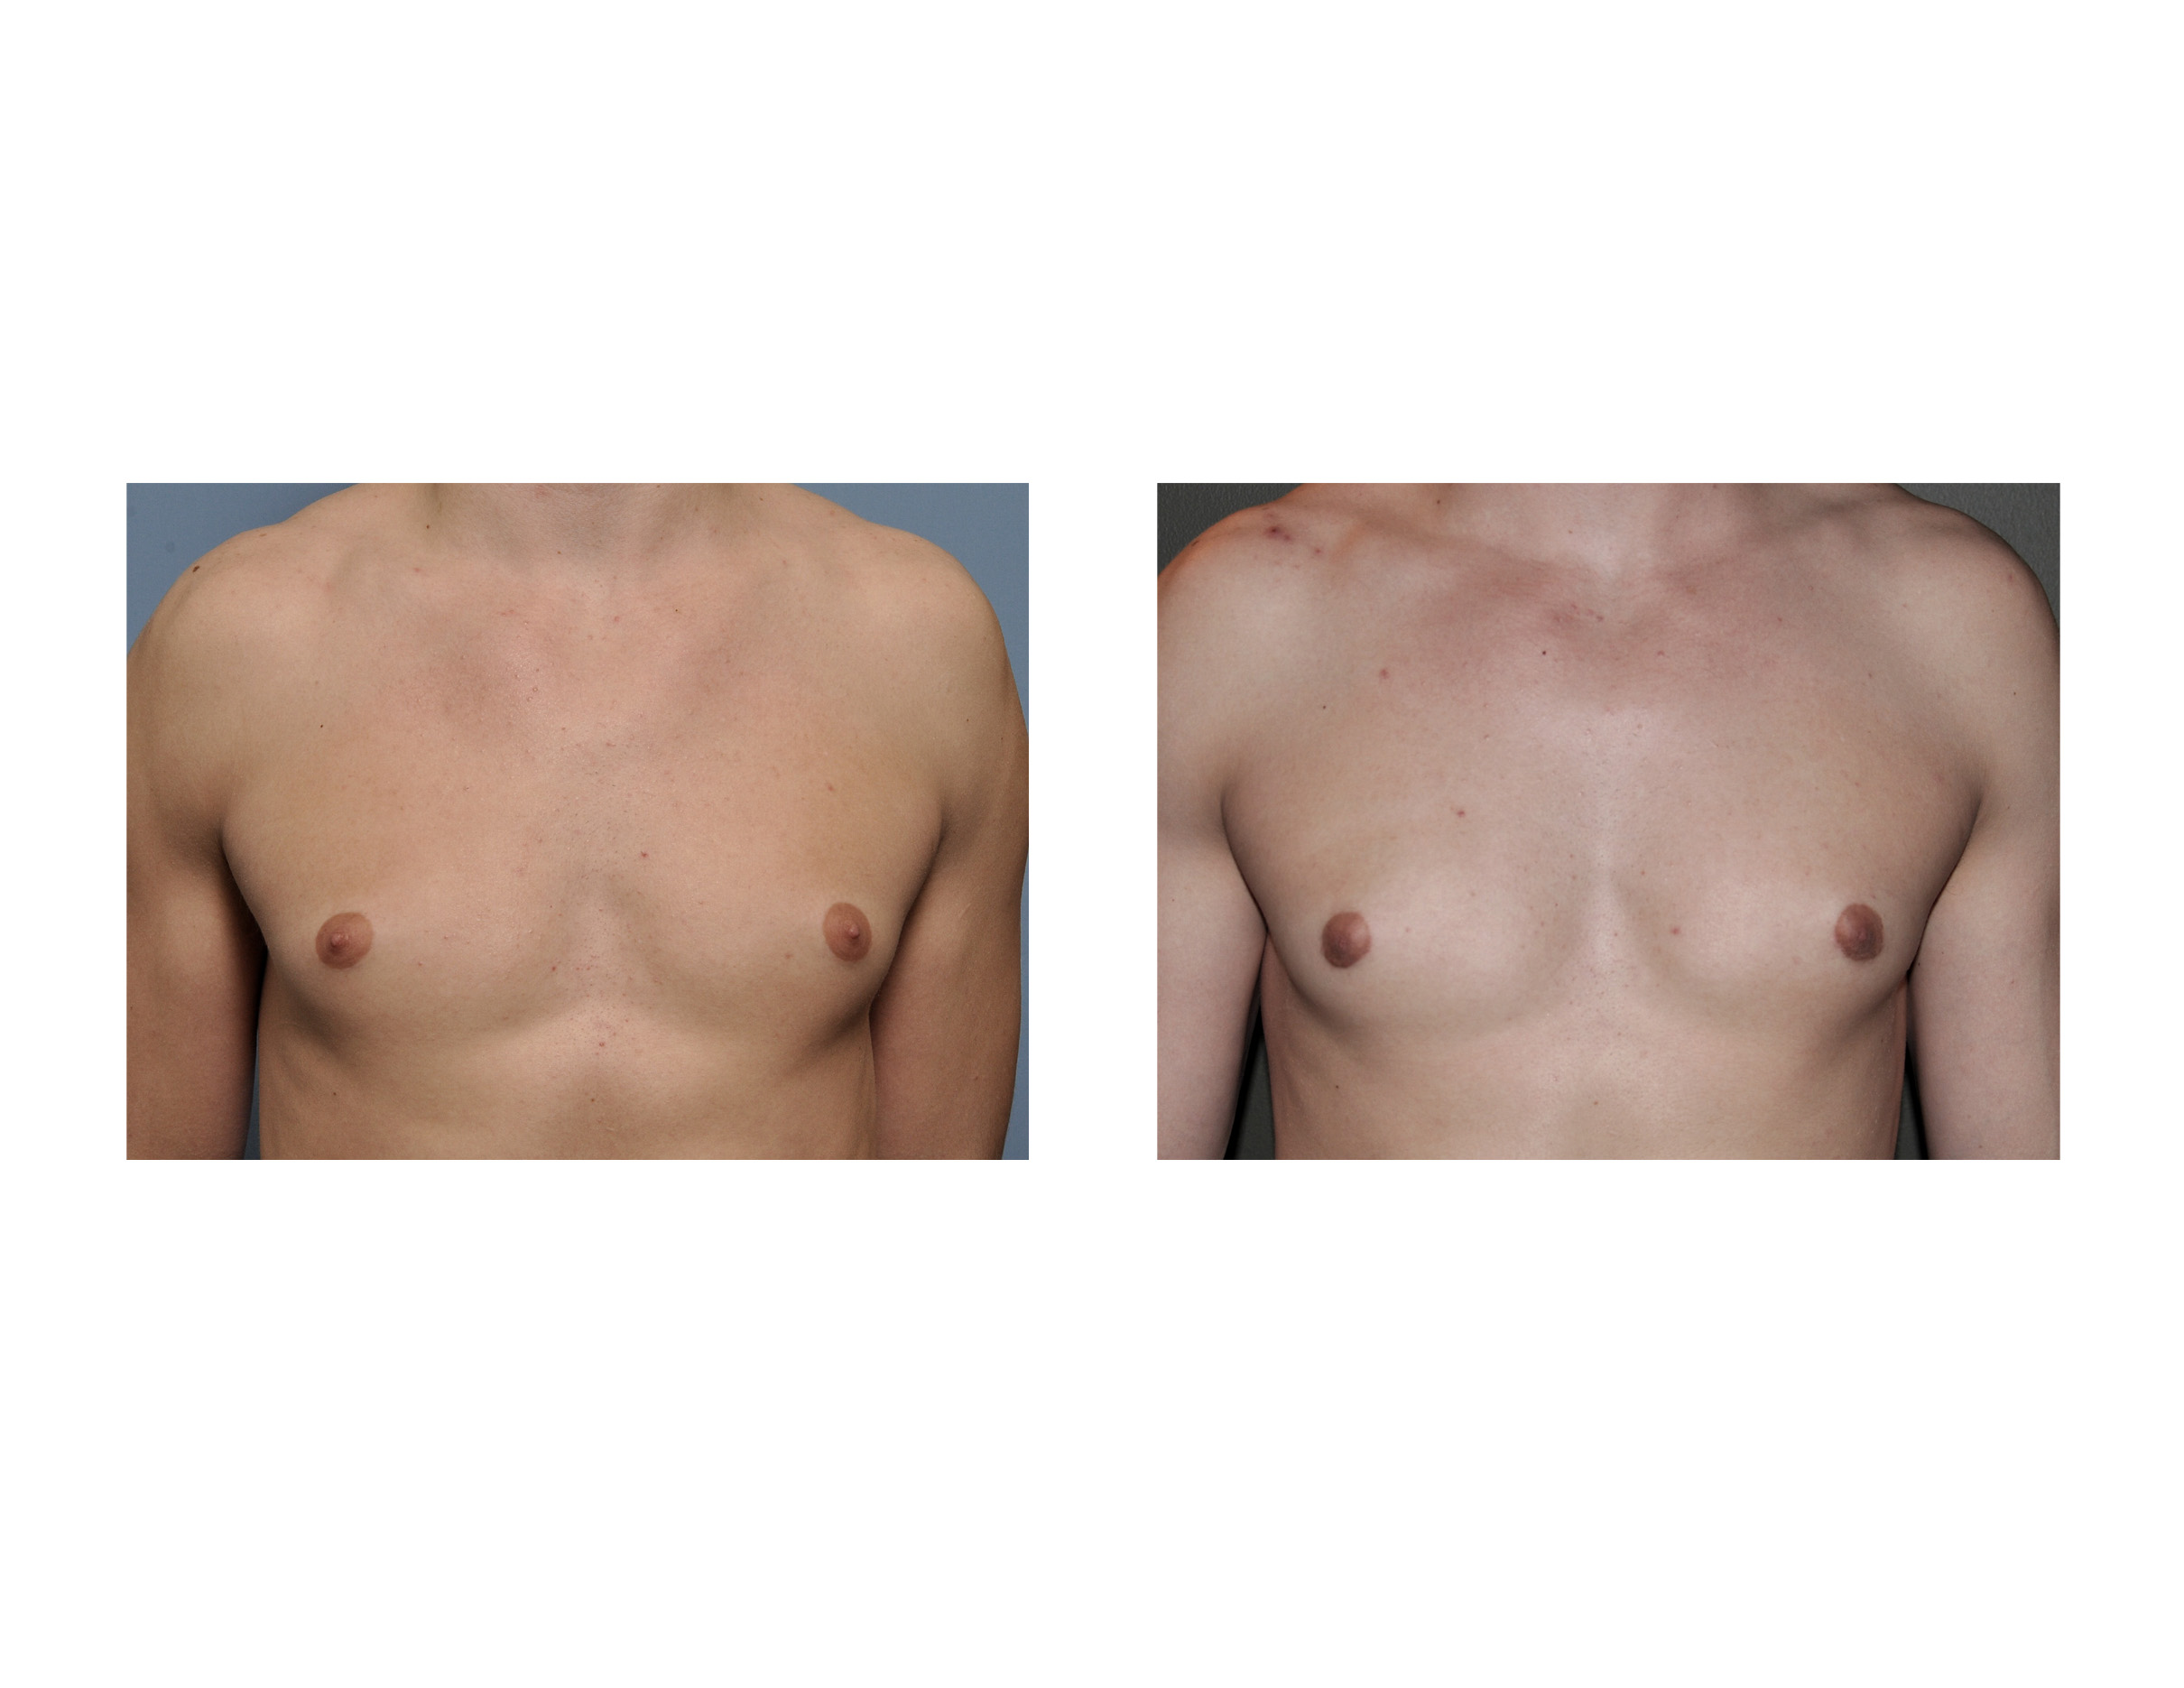 Case Study: Reduction of Puffy Nipples in Young Men - Explore